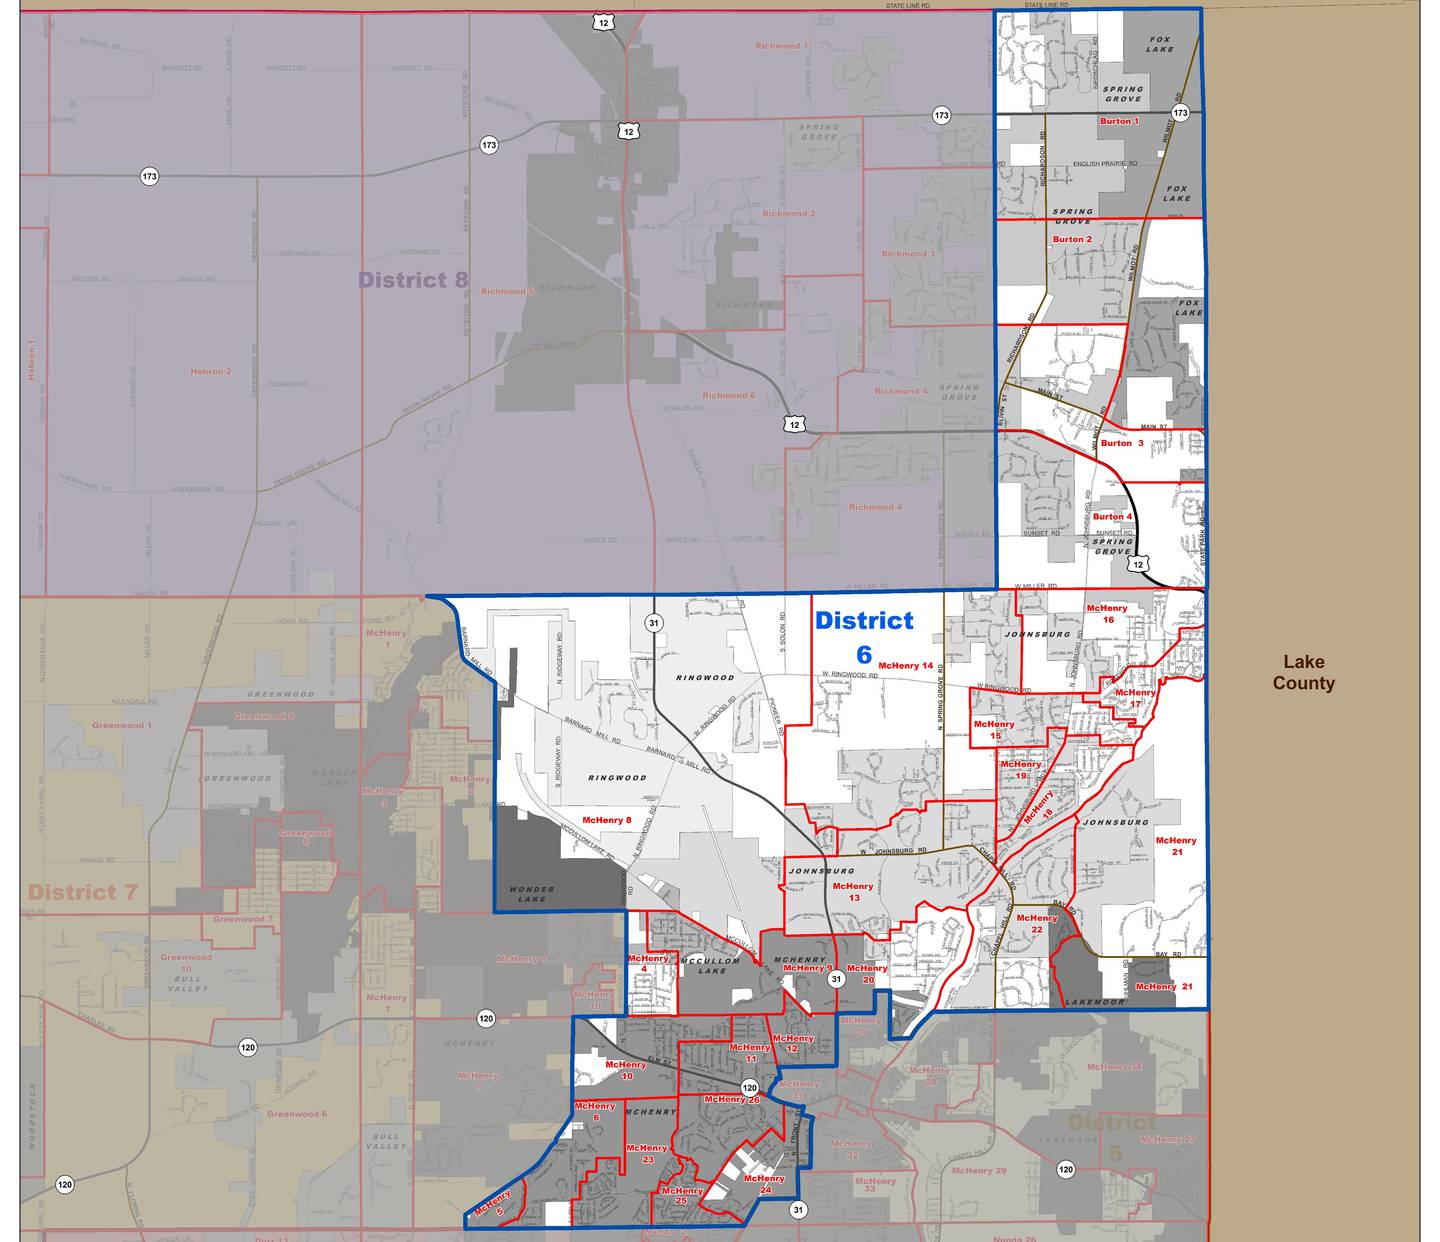 The McHenry County Board’s District 6 sits in the northeastern part of the county and includes Fox Lake, Spring Grove, McHenry, Ringwood, McCullom Lake, Lakemoor and Johnsburg.